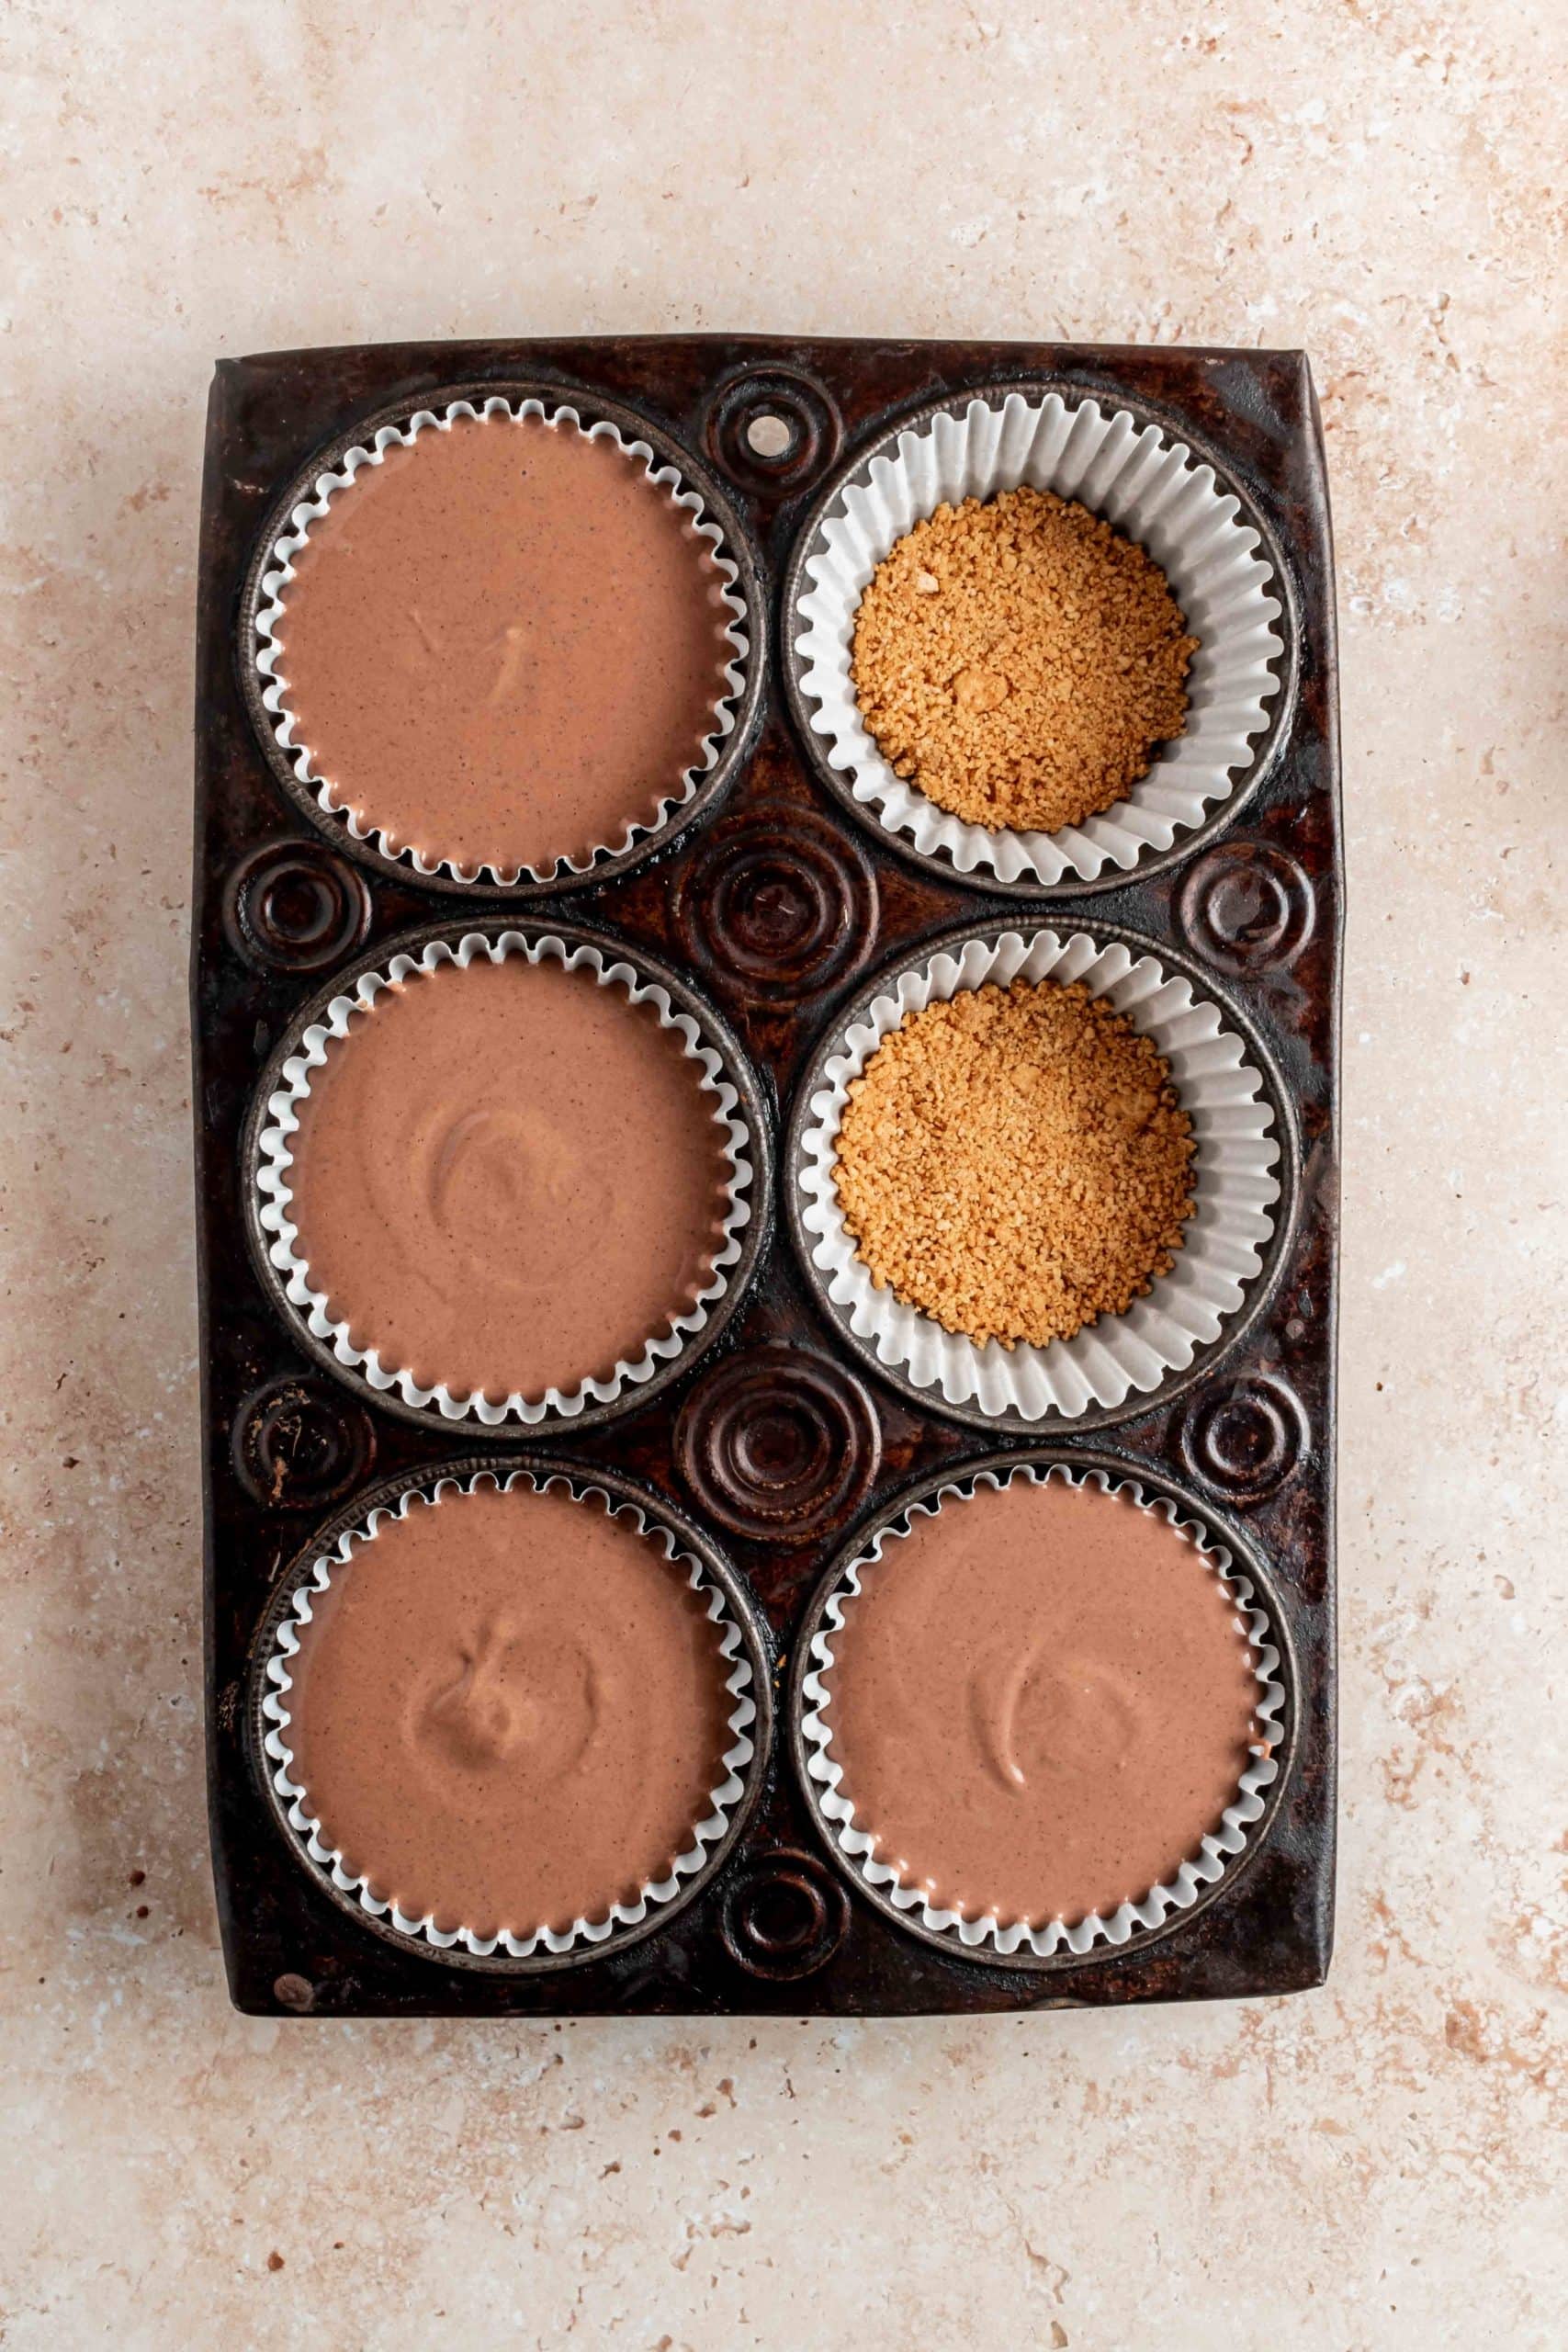 unbaked cheesecakes in cupcake tin